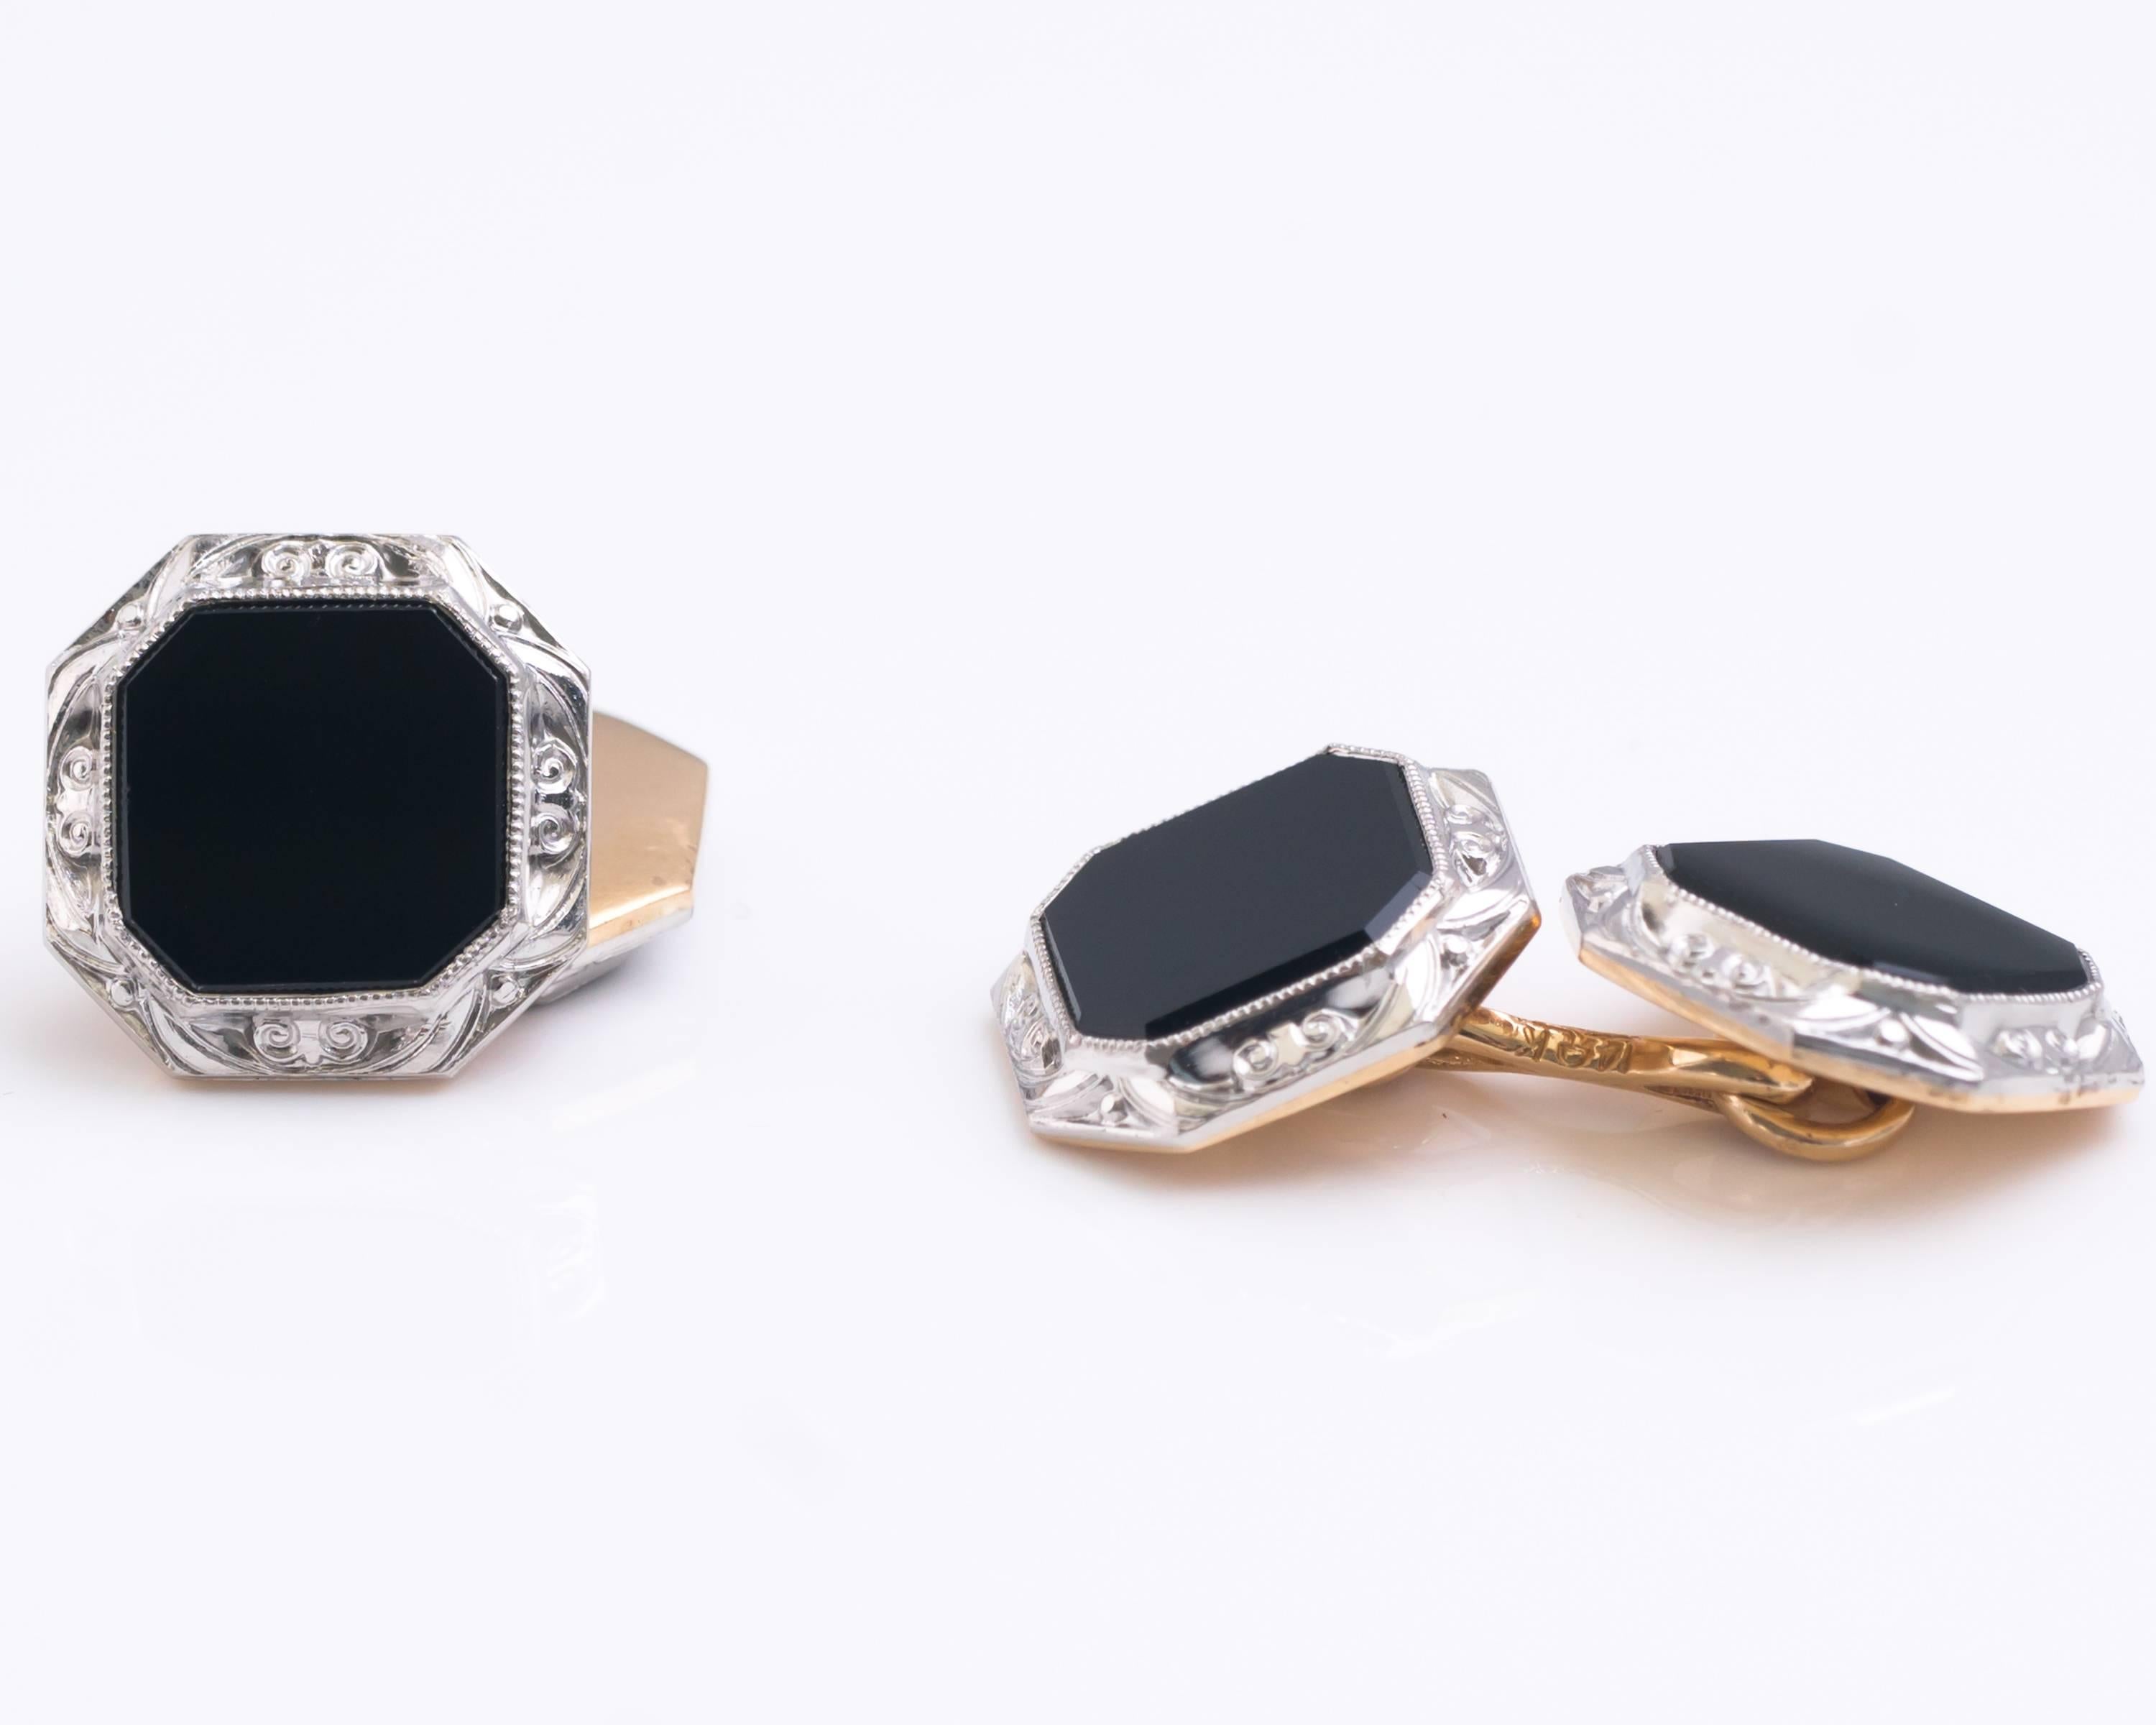 1940s Chain Link Cufflink and Stud Set - Platinum, 14 Carat Yellow Gold, Onyx 

Feature Onyx centers with hand engraved Platinum bezels and 14 Karat Yellow Gold backs. 
The Onyx center stones are bezel set. The bezel edge is embellished with a fine